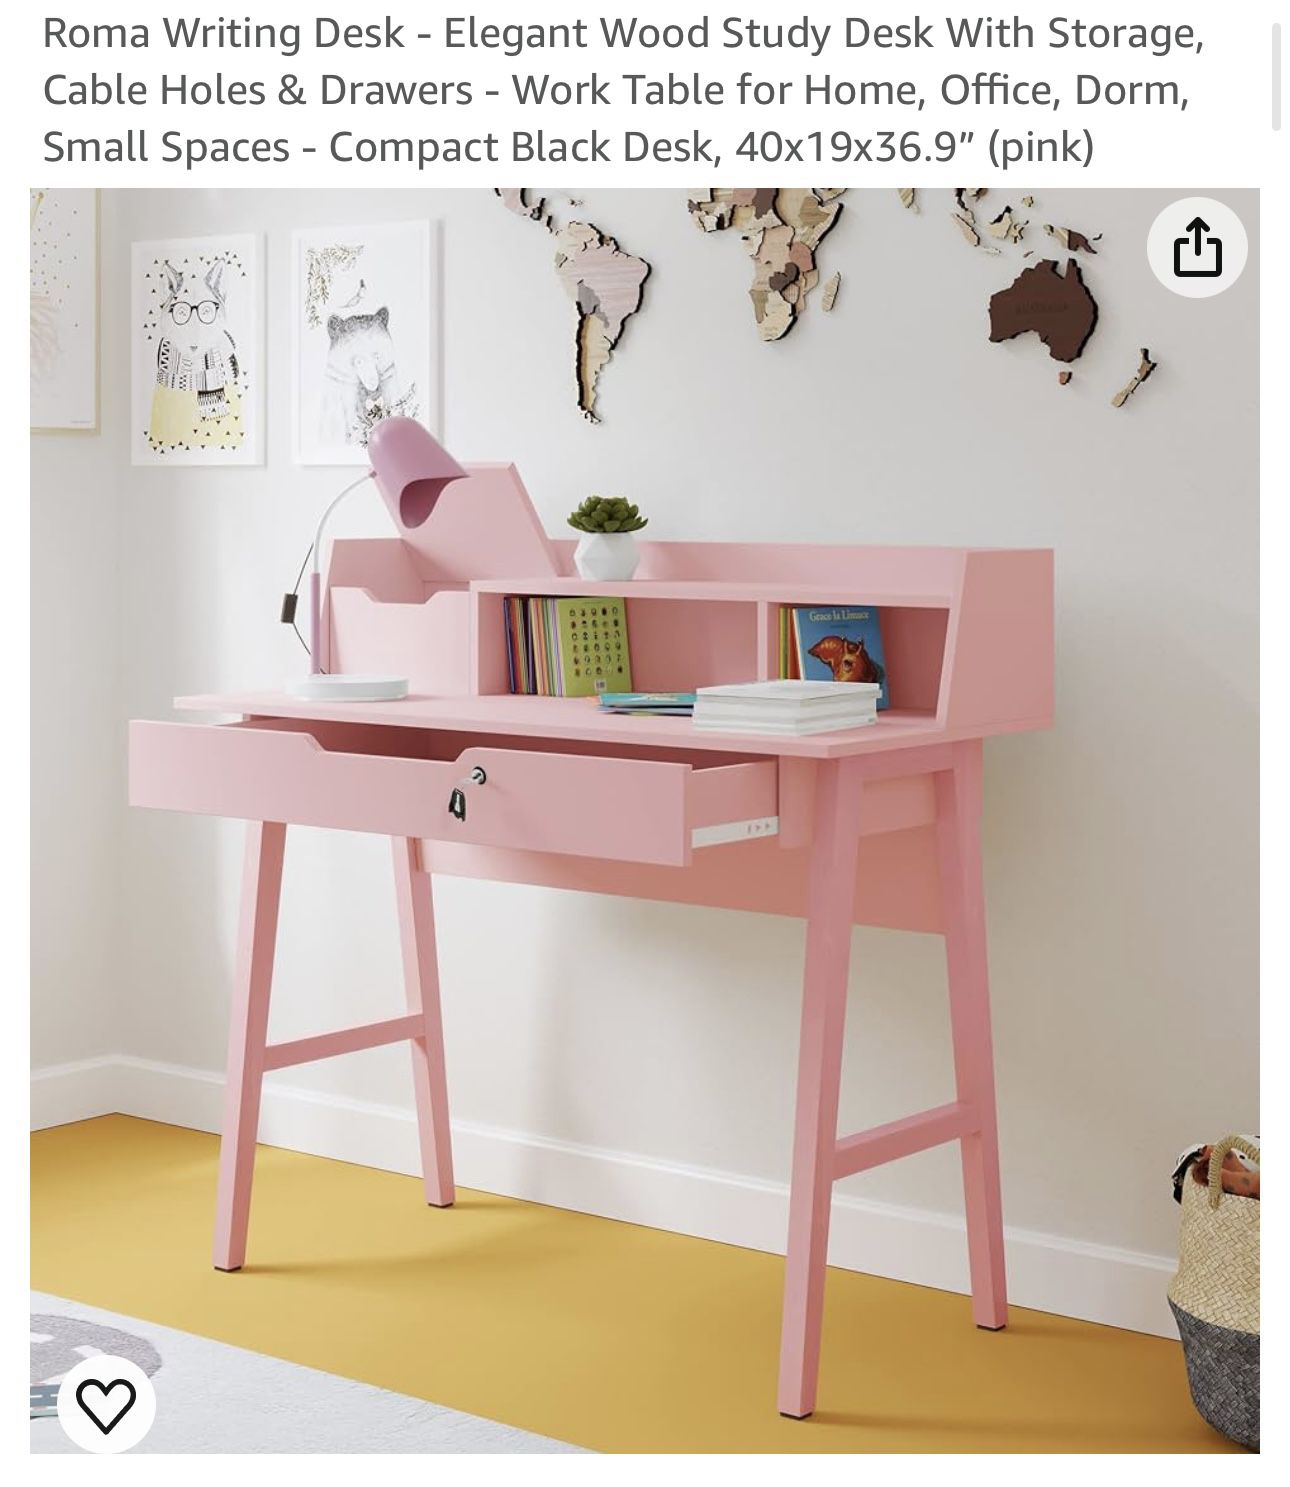 Pink Roma Writing Desk - Elegant Wood Study Desk With Storage, Cable Holes & Drawers